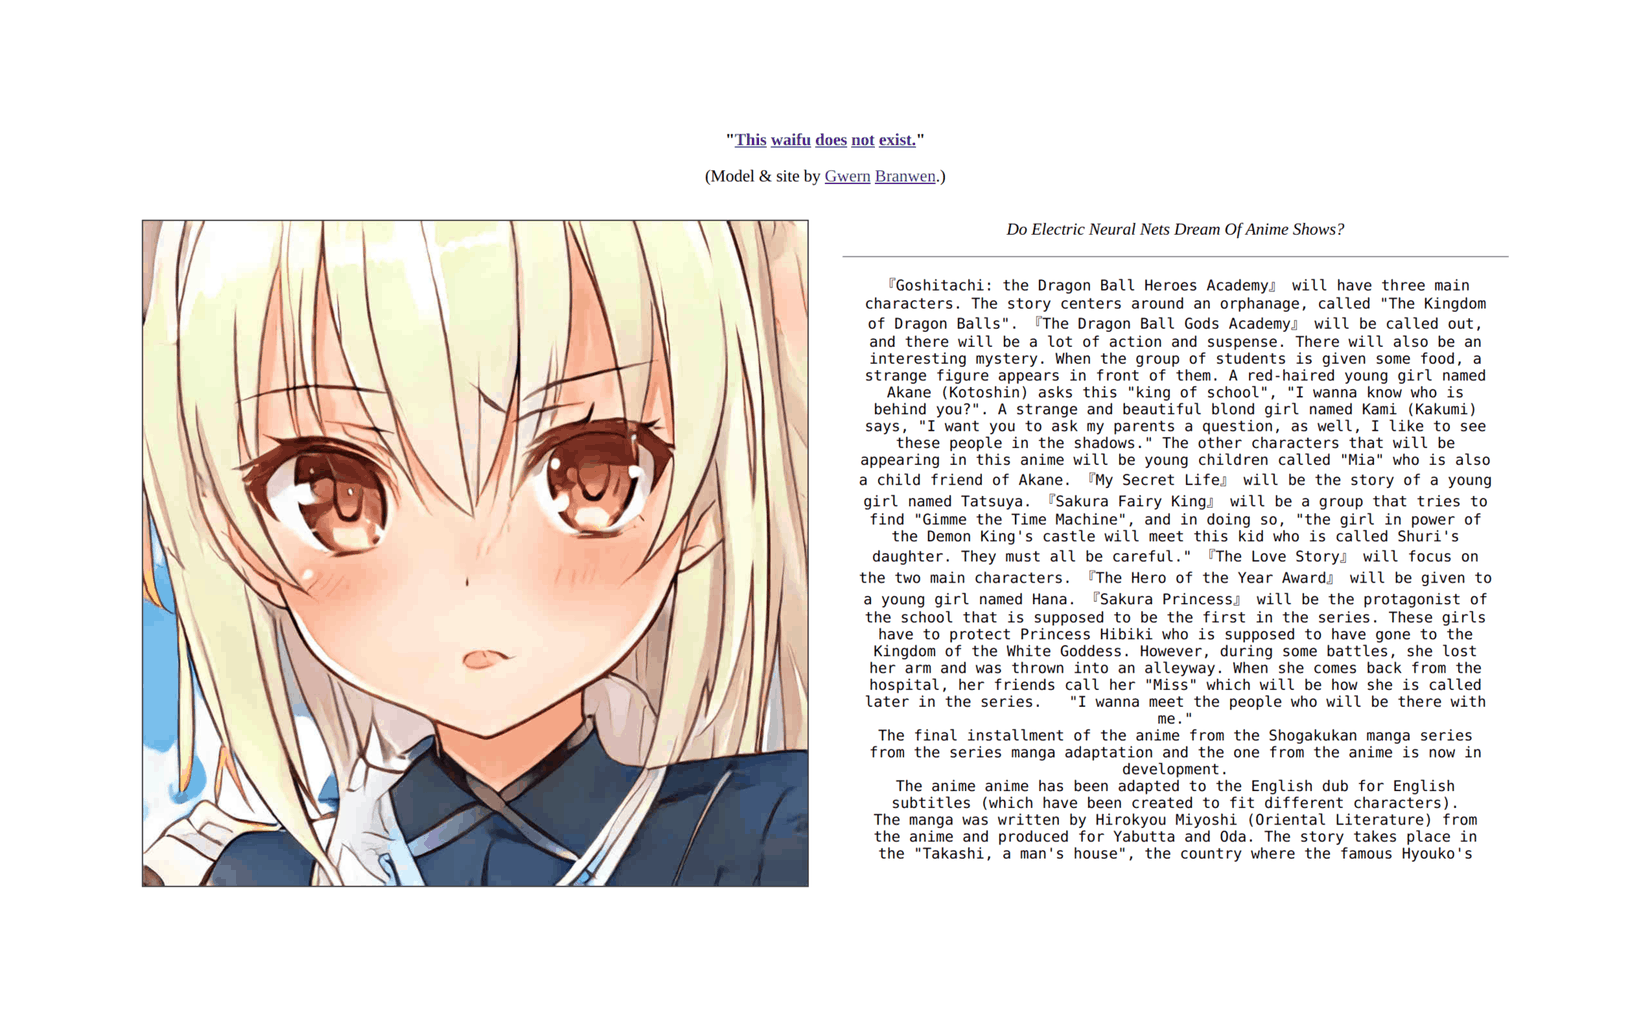 A screenshot of “This Waifu Does Not Exist” (TWDNE) showing a random StyleGAN-generated anime face and a random GPT-3 text sample conditioned on anime keywords/​phrases.